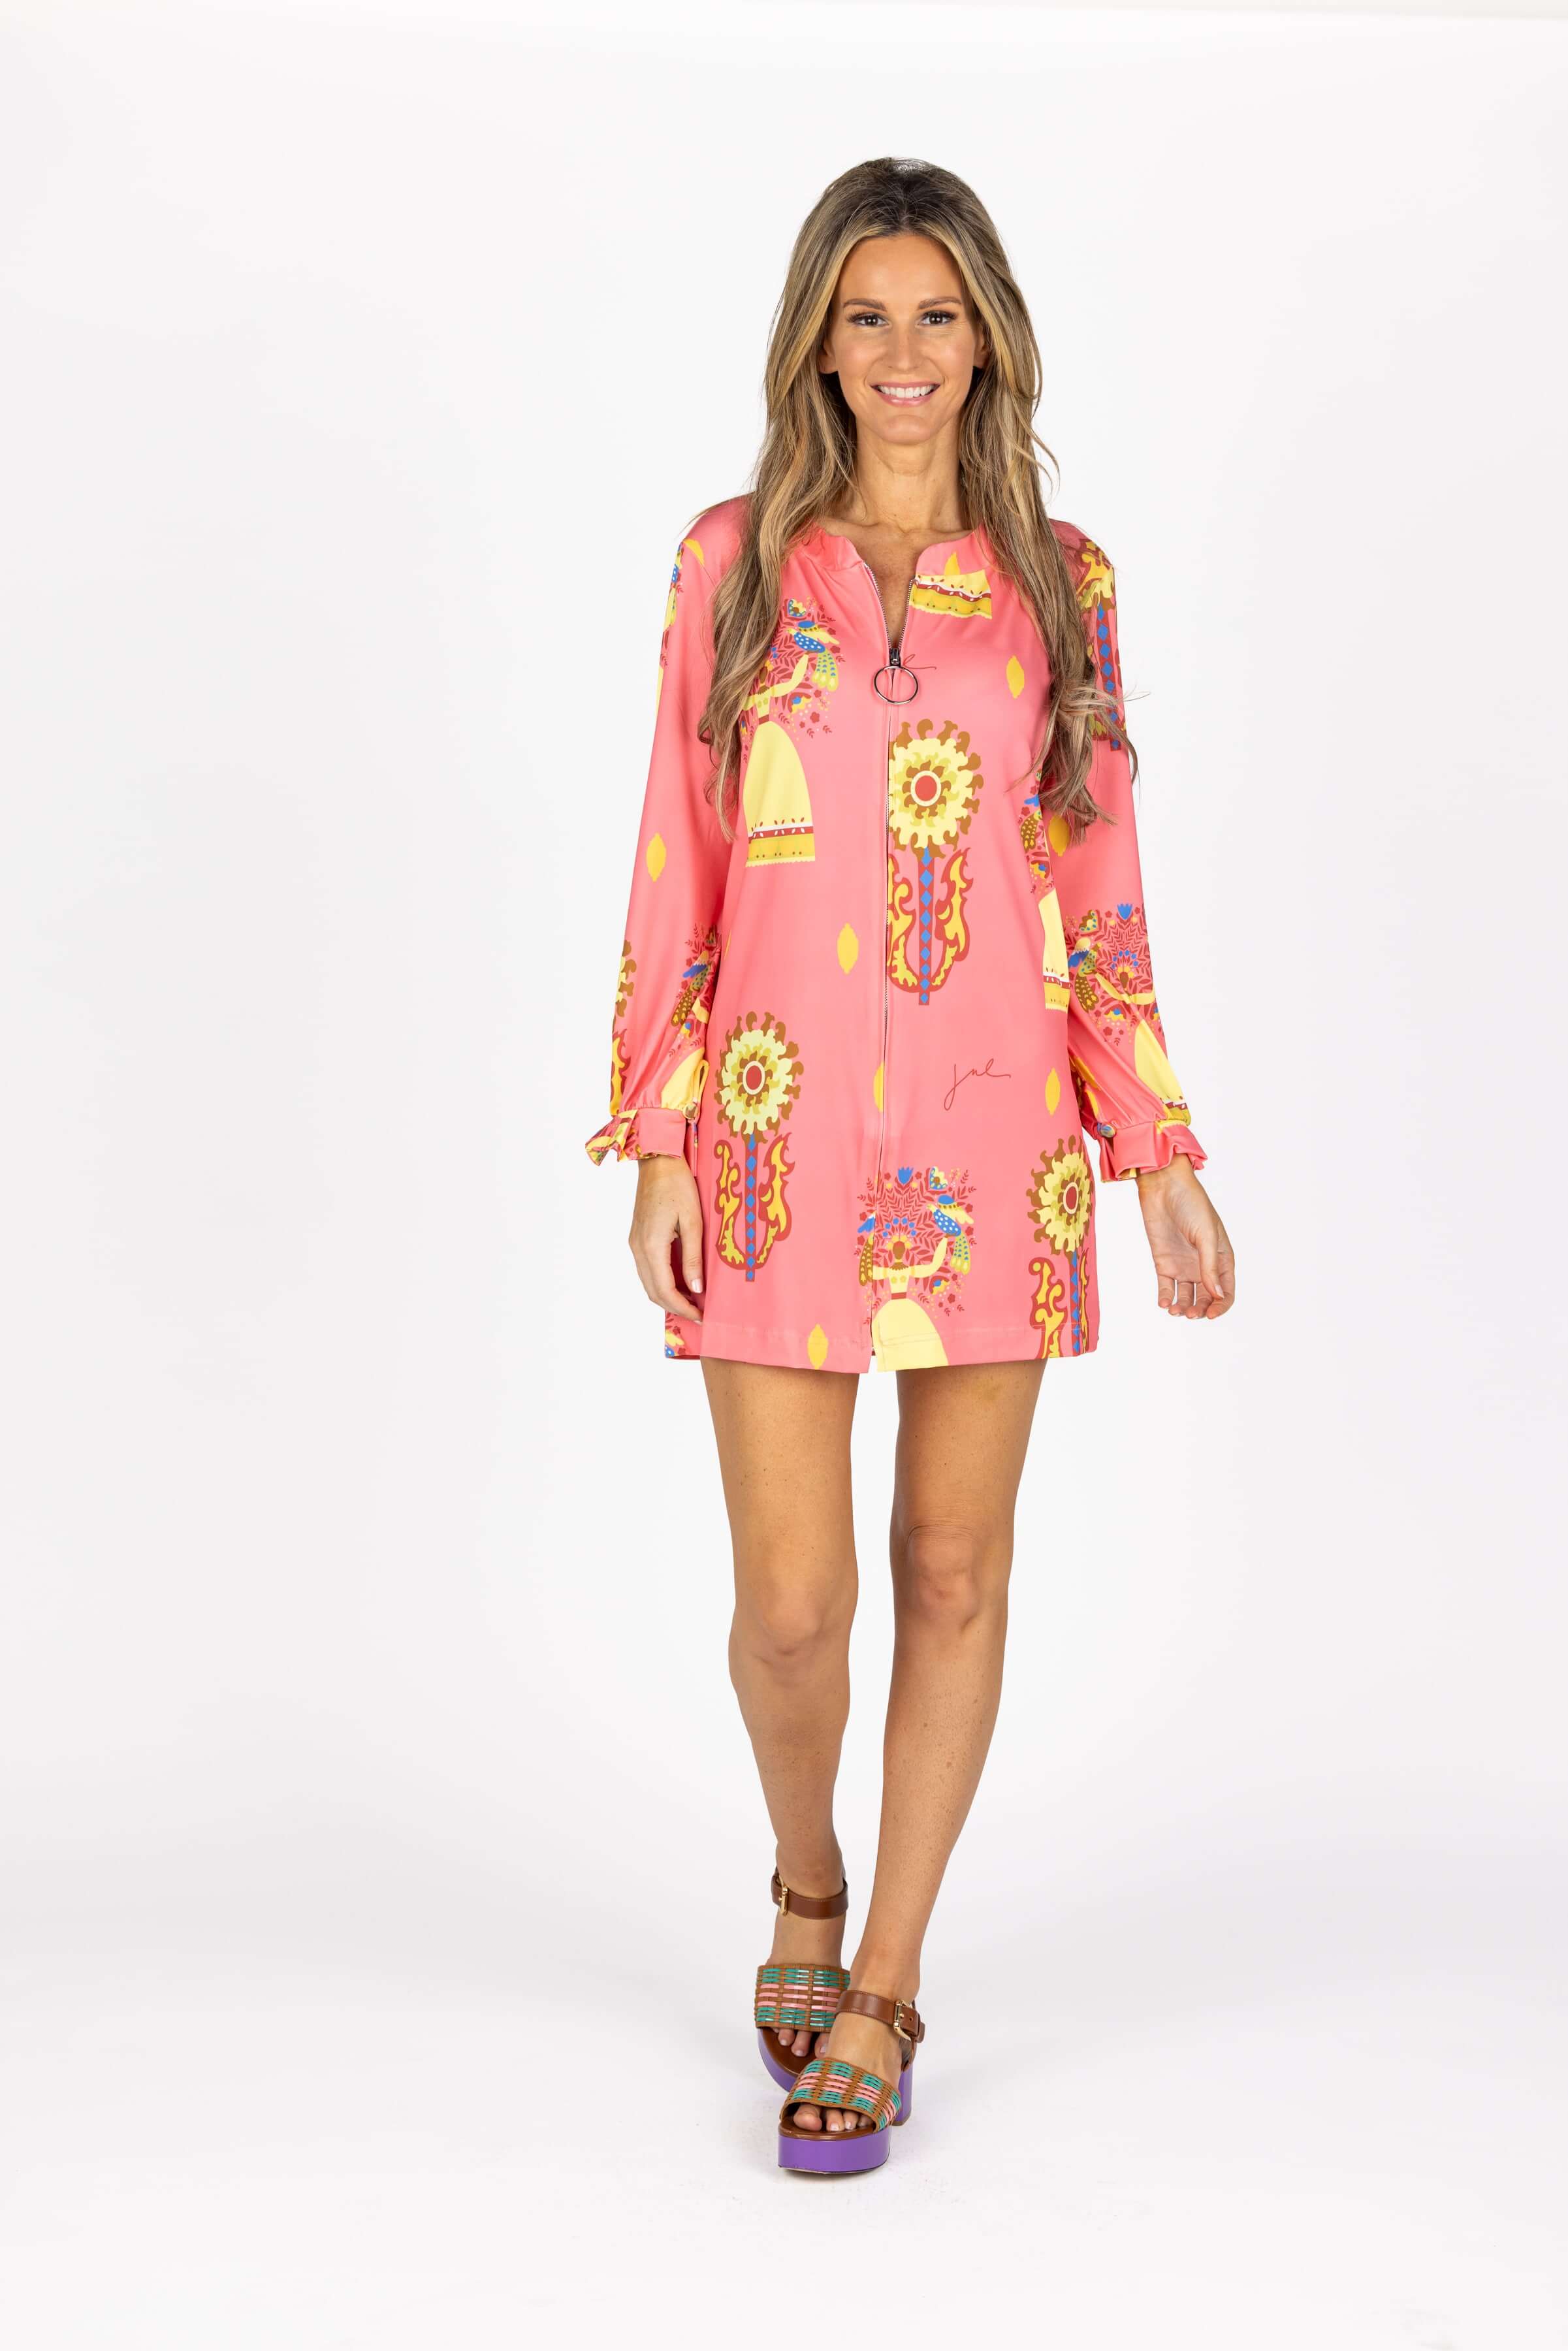 The Twiggy Coverup in Spanish Lovers Pink